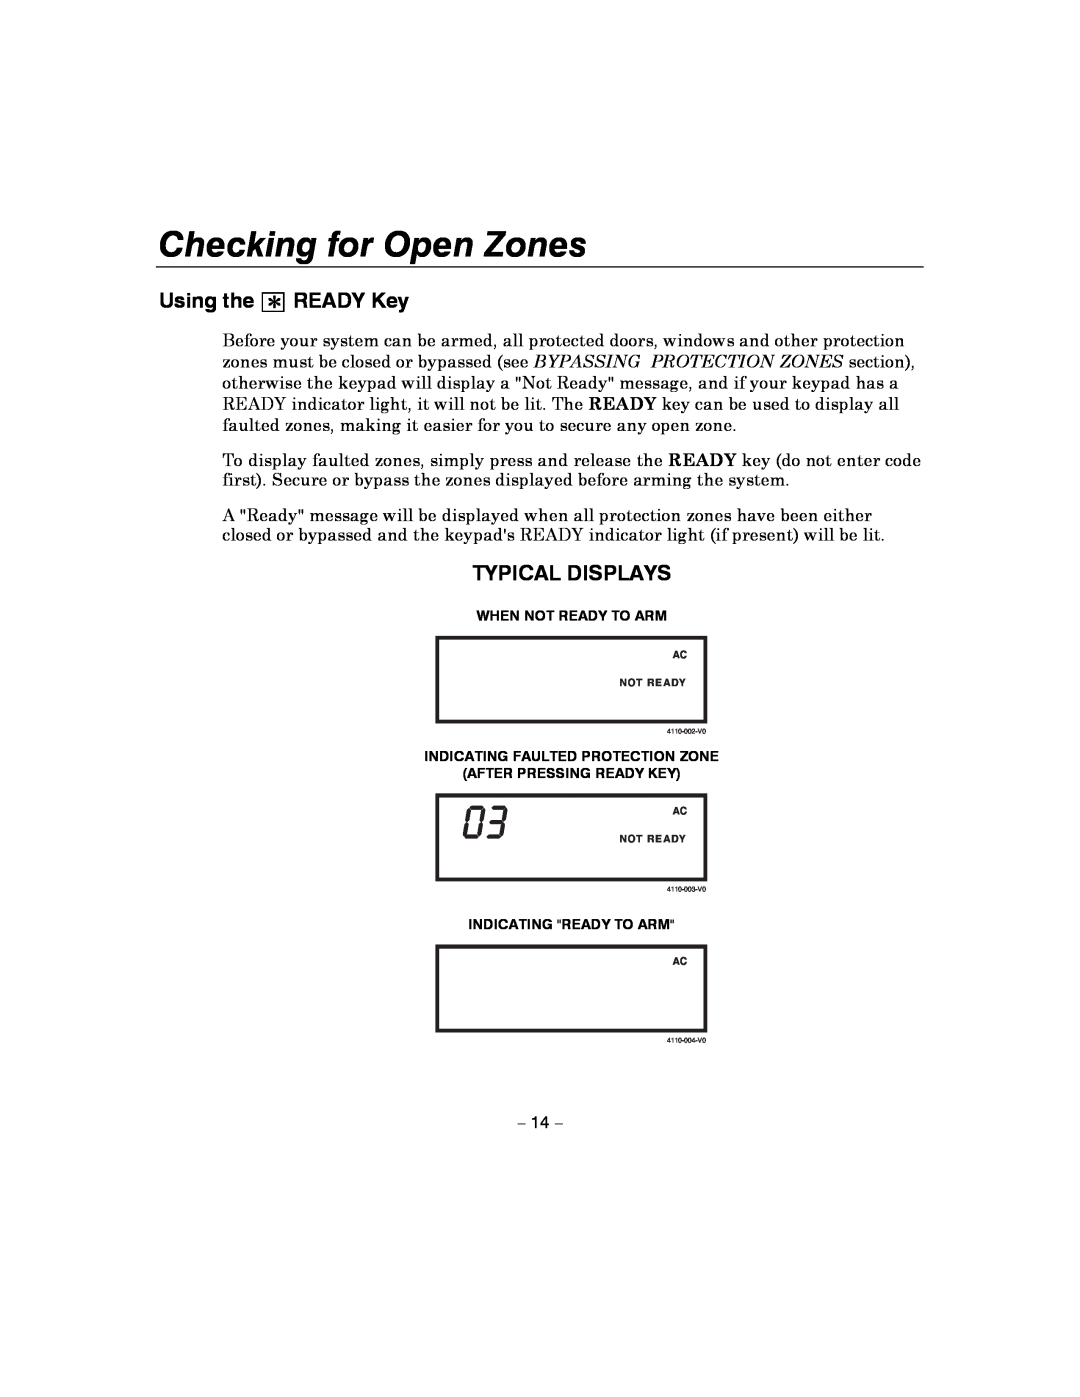 Honeywell 4110XM manual Checking for Open Zones, Using the, READY Key, Typical Displays, 03AC 